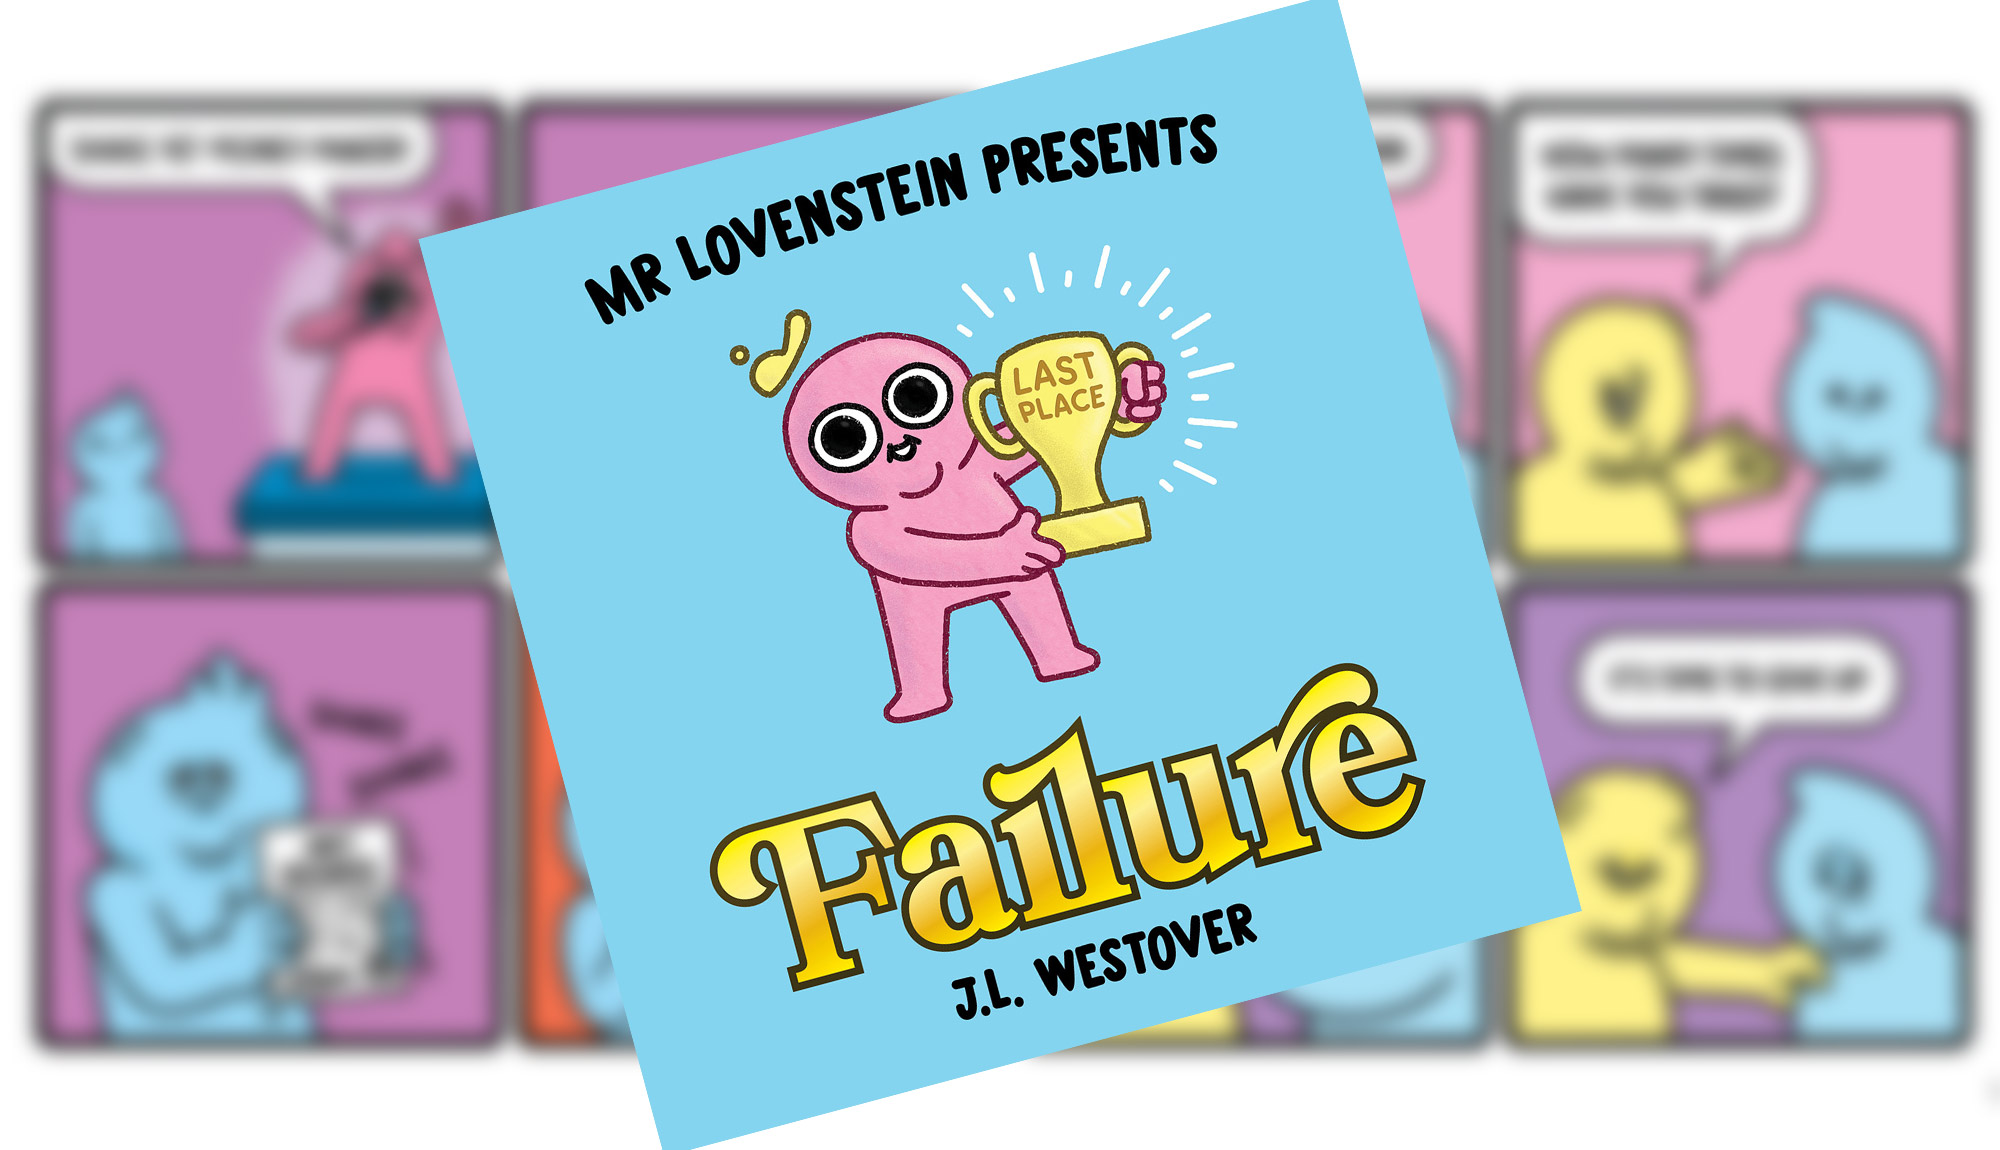 Extended Preview of  J.L. Westover’s MR. LOVENSTEIN PRESENTS: FAILURE